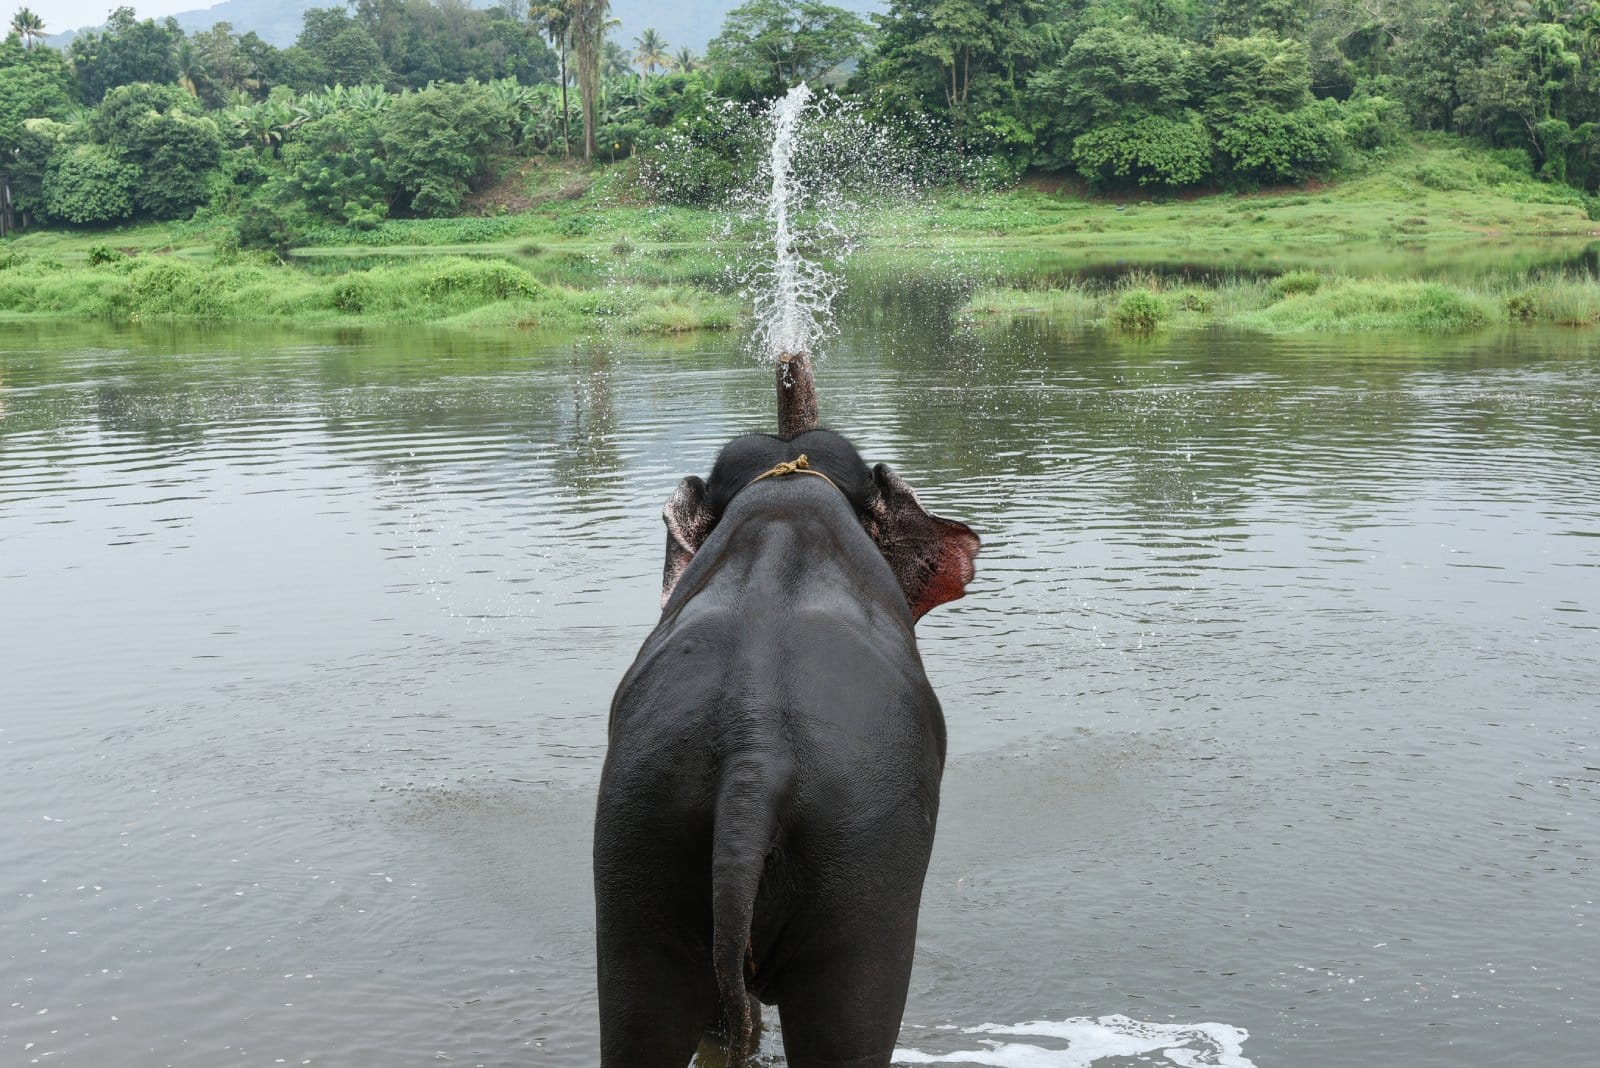 <p class="wp-caption-text">Image Credit: Shutterstock / Santhosh Varghese</p>  <p><span>Nestled in the Western Ghats, Periyar Wildlife Sanctuary is renowned for its elephant population and picturesque lake, an artificial reservoir around which the park is developed. The sanctuary’s dense evergreen forests are also home to tigers, gaur, sambar, and a variety of birds and reptiles. Boat safaris on Periyar Lake offer a unique vantage point for wildlife viewing, especially for spotting herds of elephants along the water’s edge.</span></p>